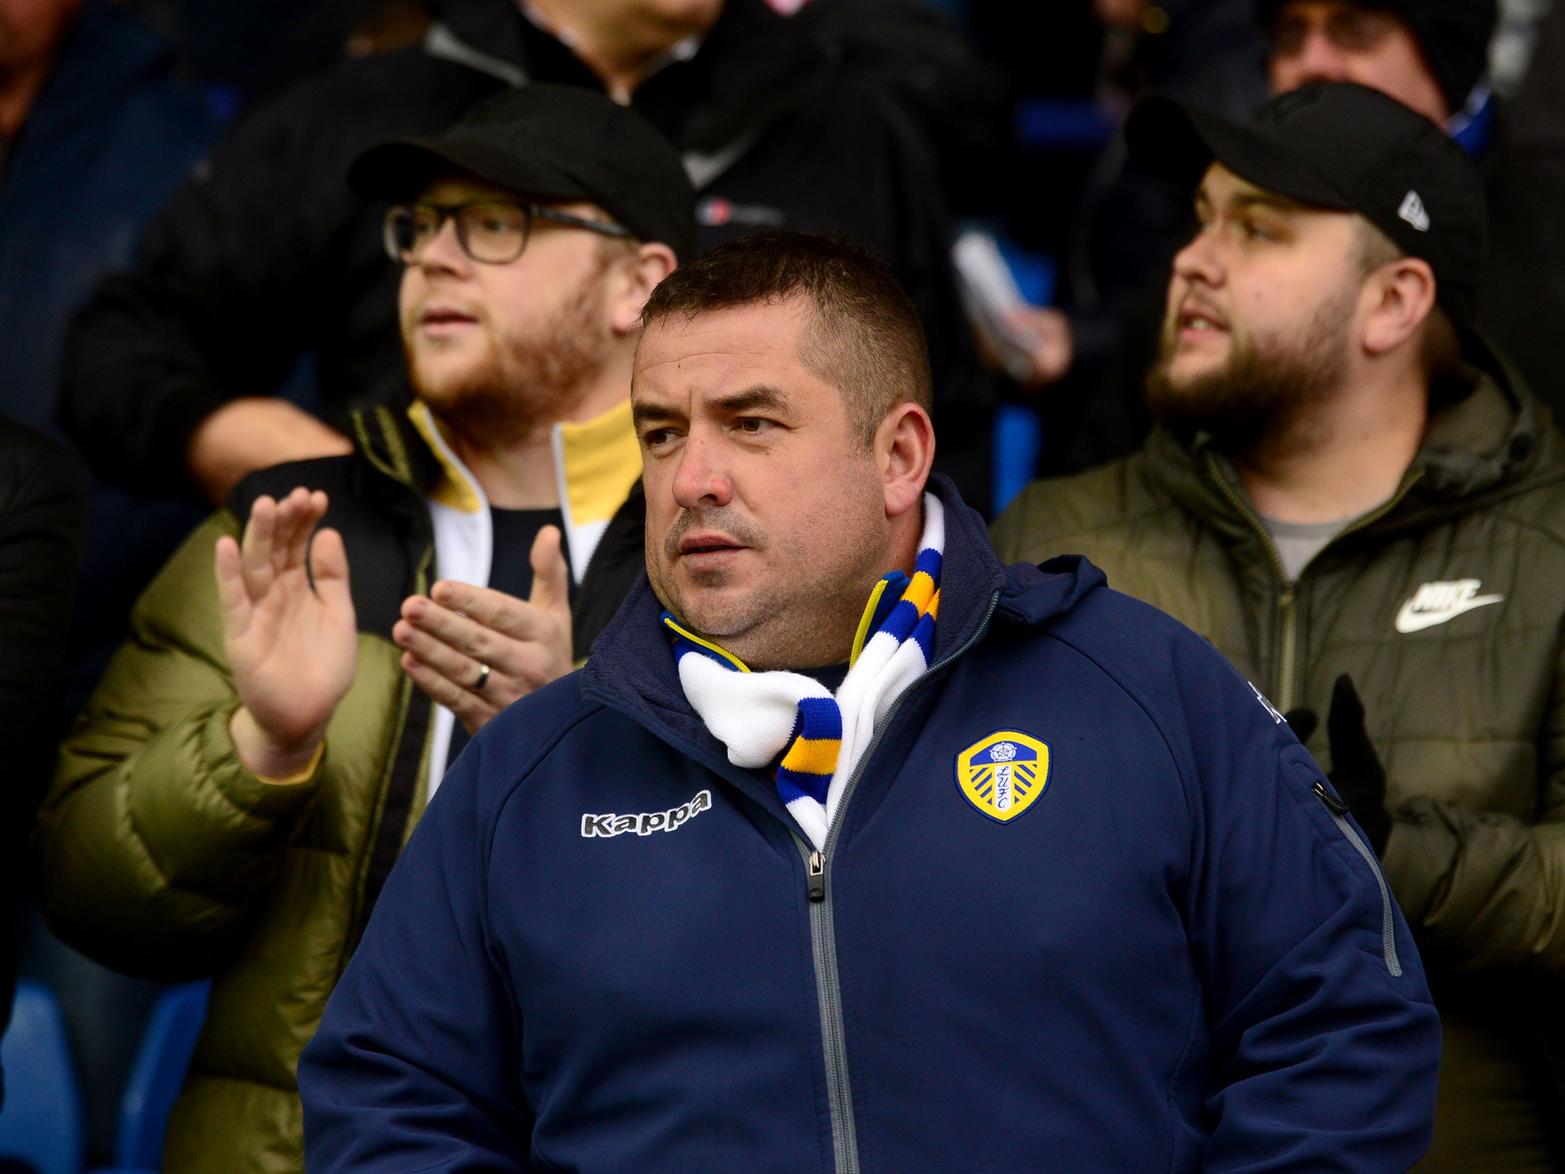 Leeds who were forced into the early defensive action